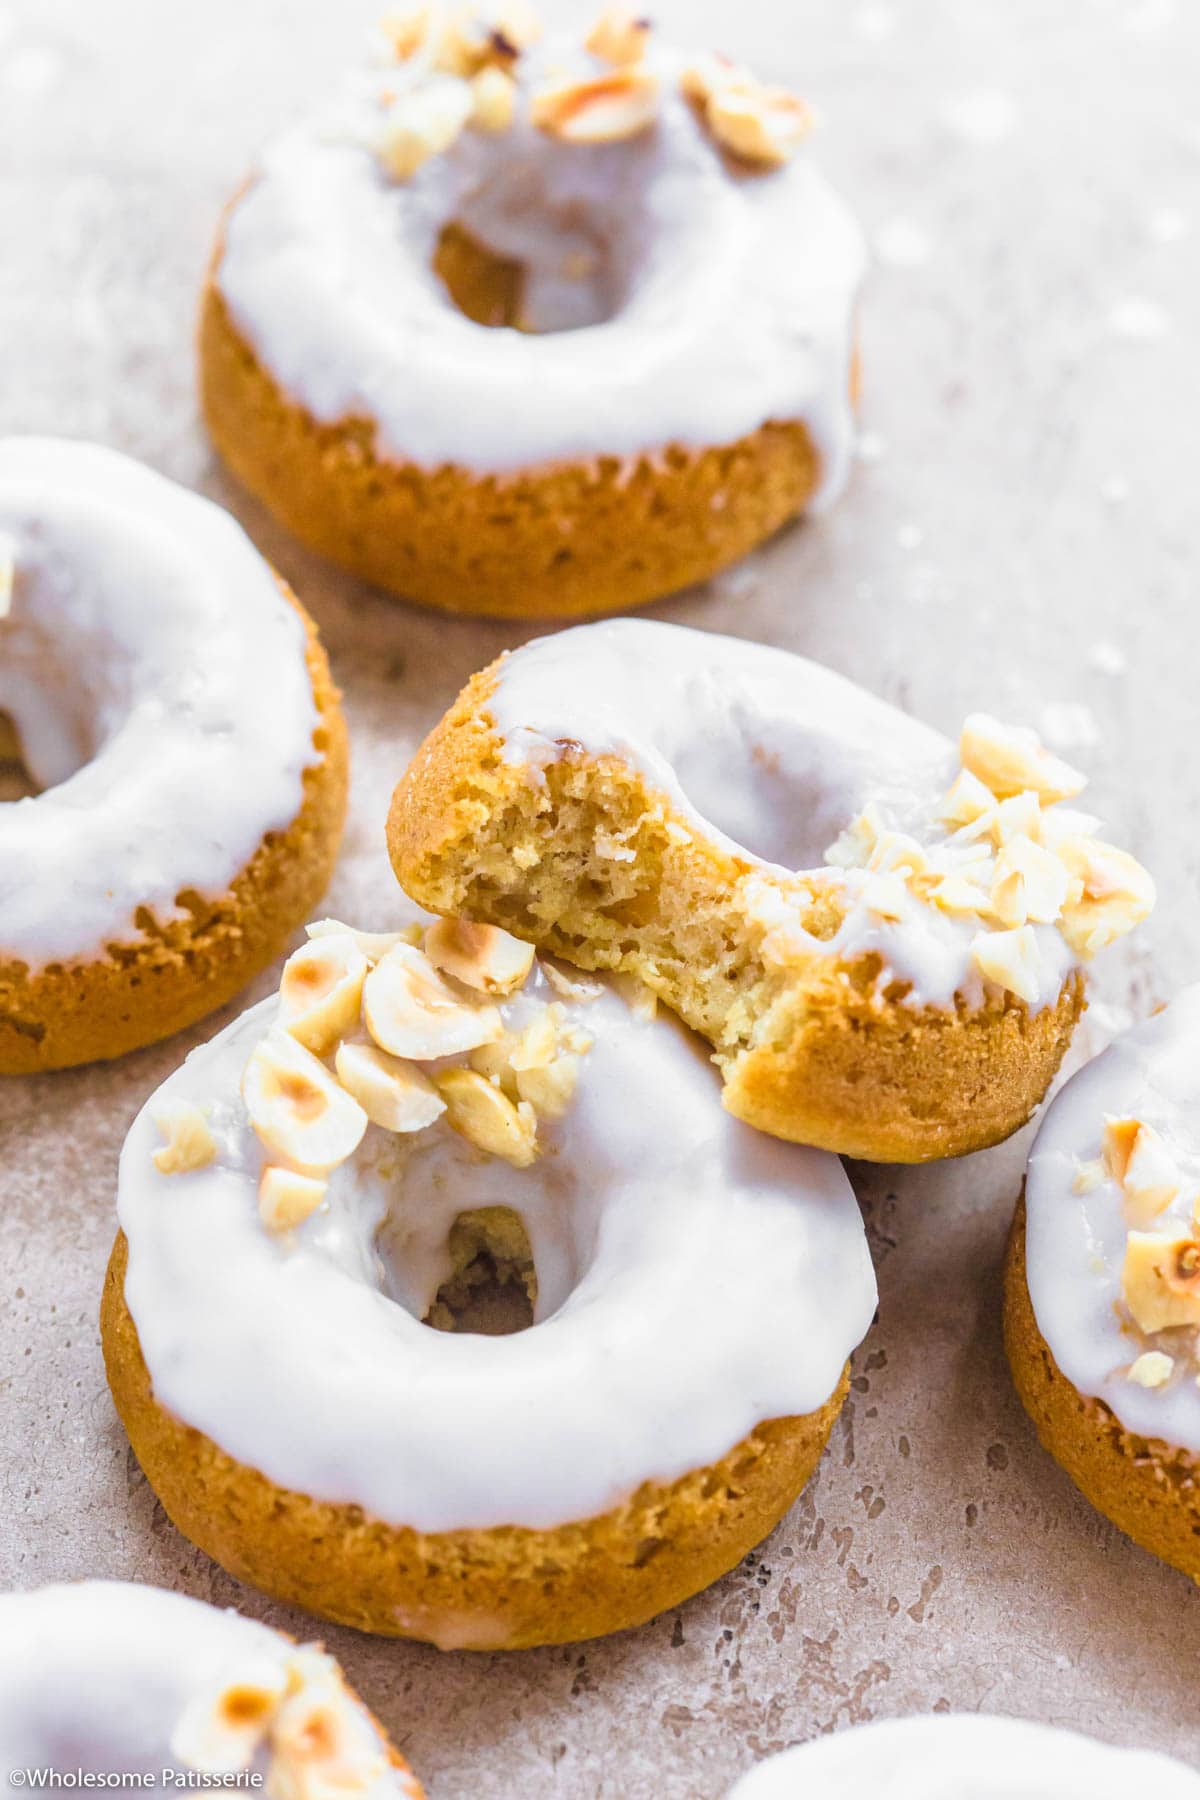 Baked coconut donuts sitting on beige background.